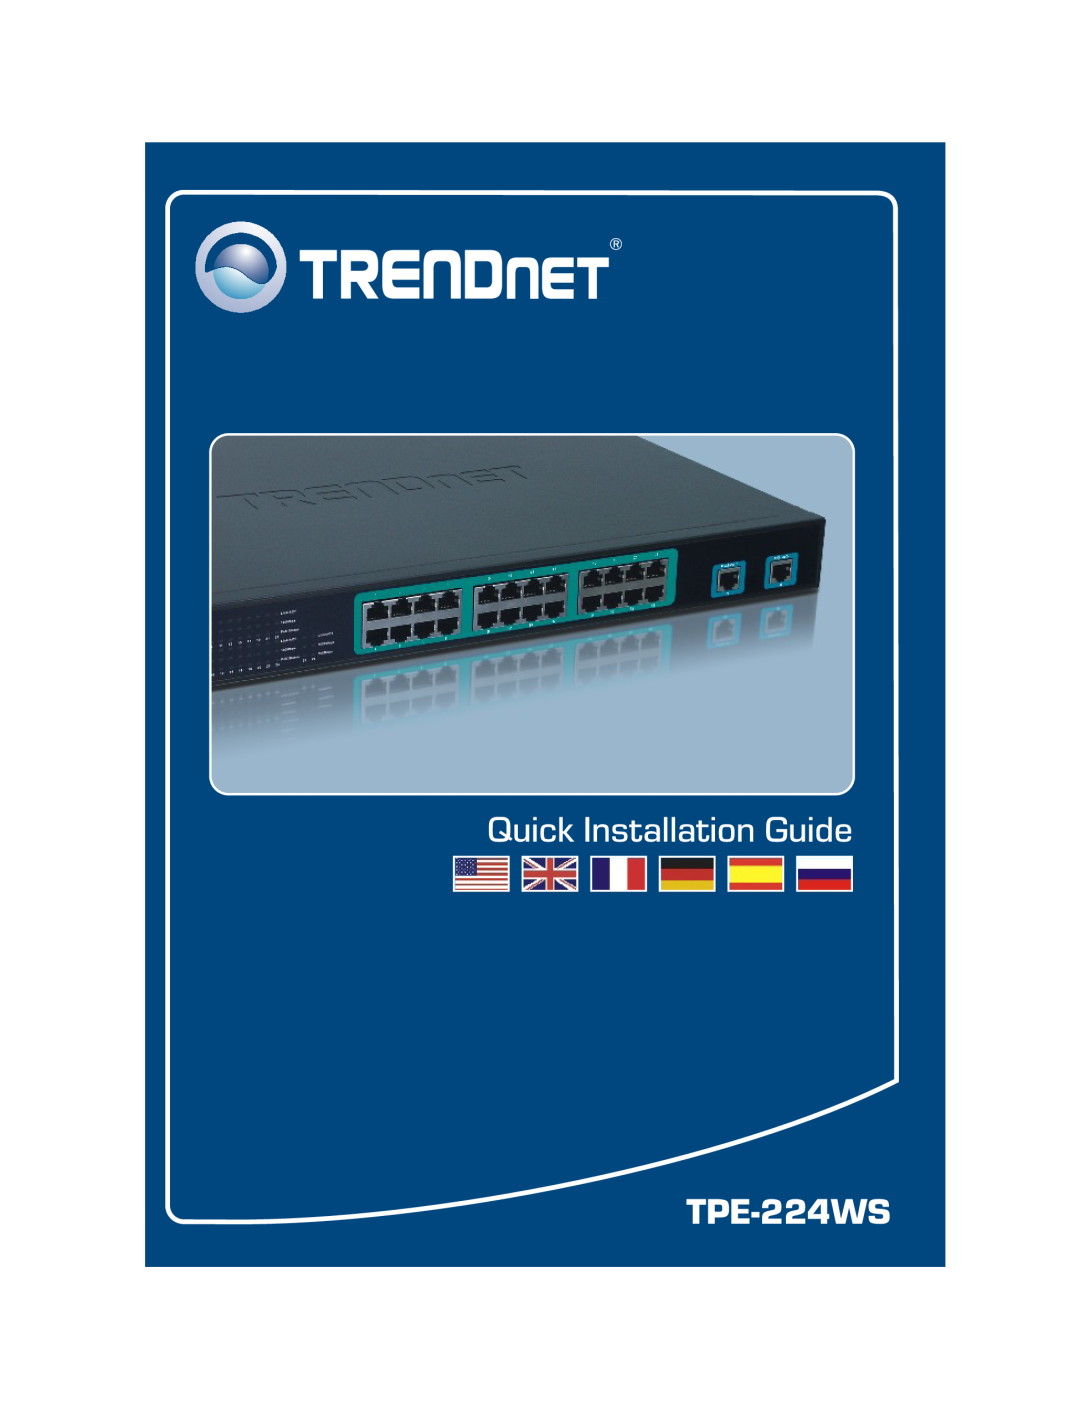 TRENDnet TPE-224WS manual Quick Installation Guide 